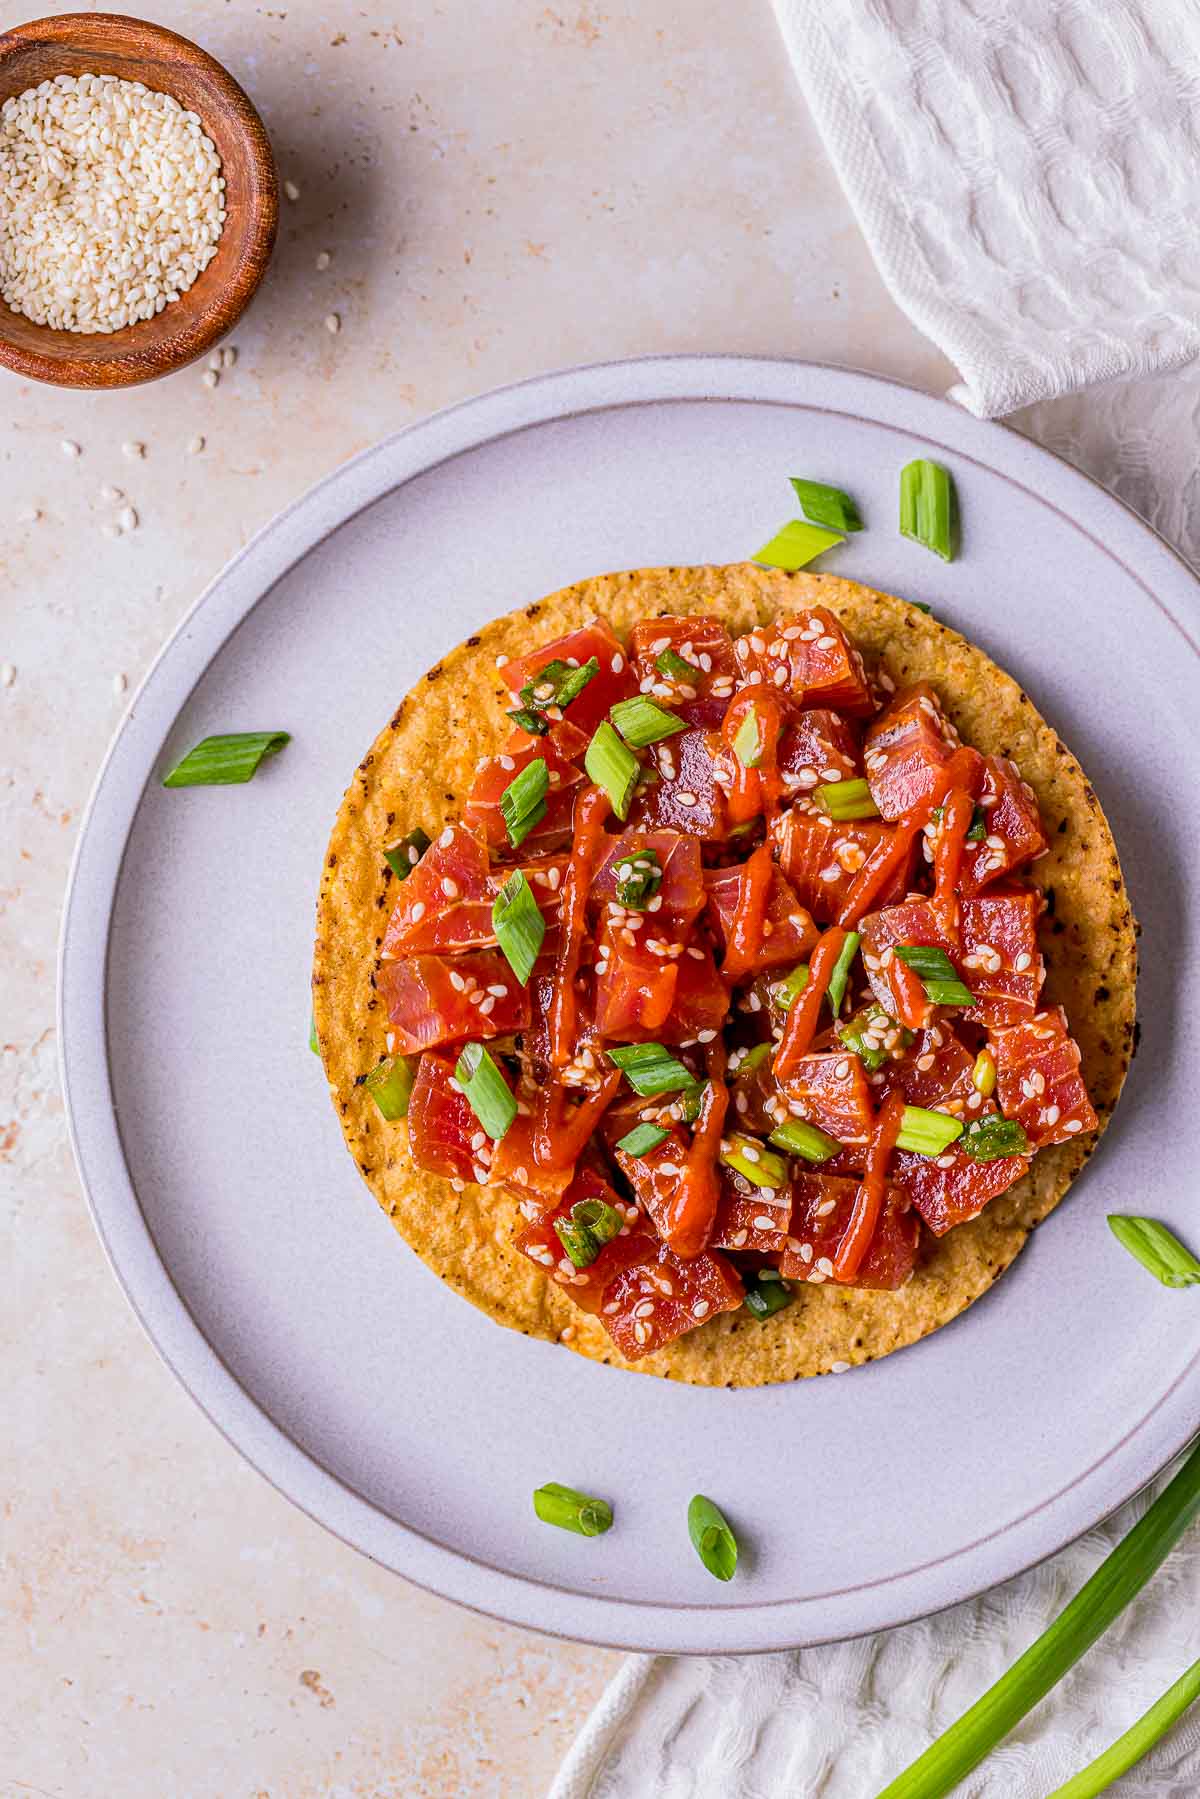 spicy tuna garnished with hot sauce, sesame seeds and green onions on a tostada